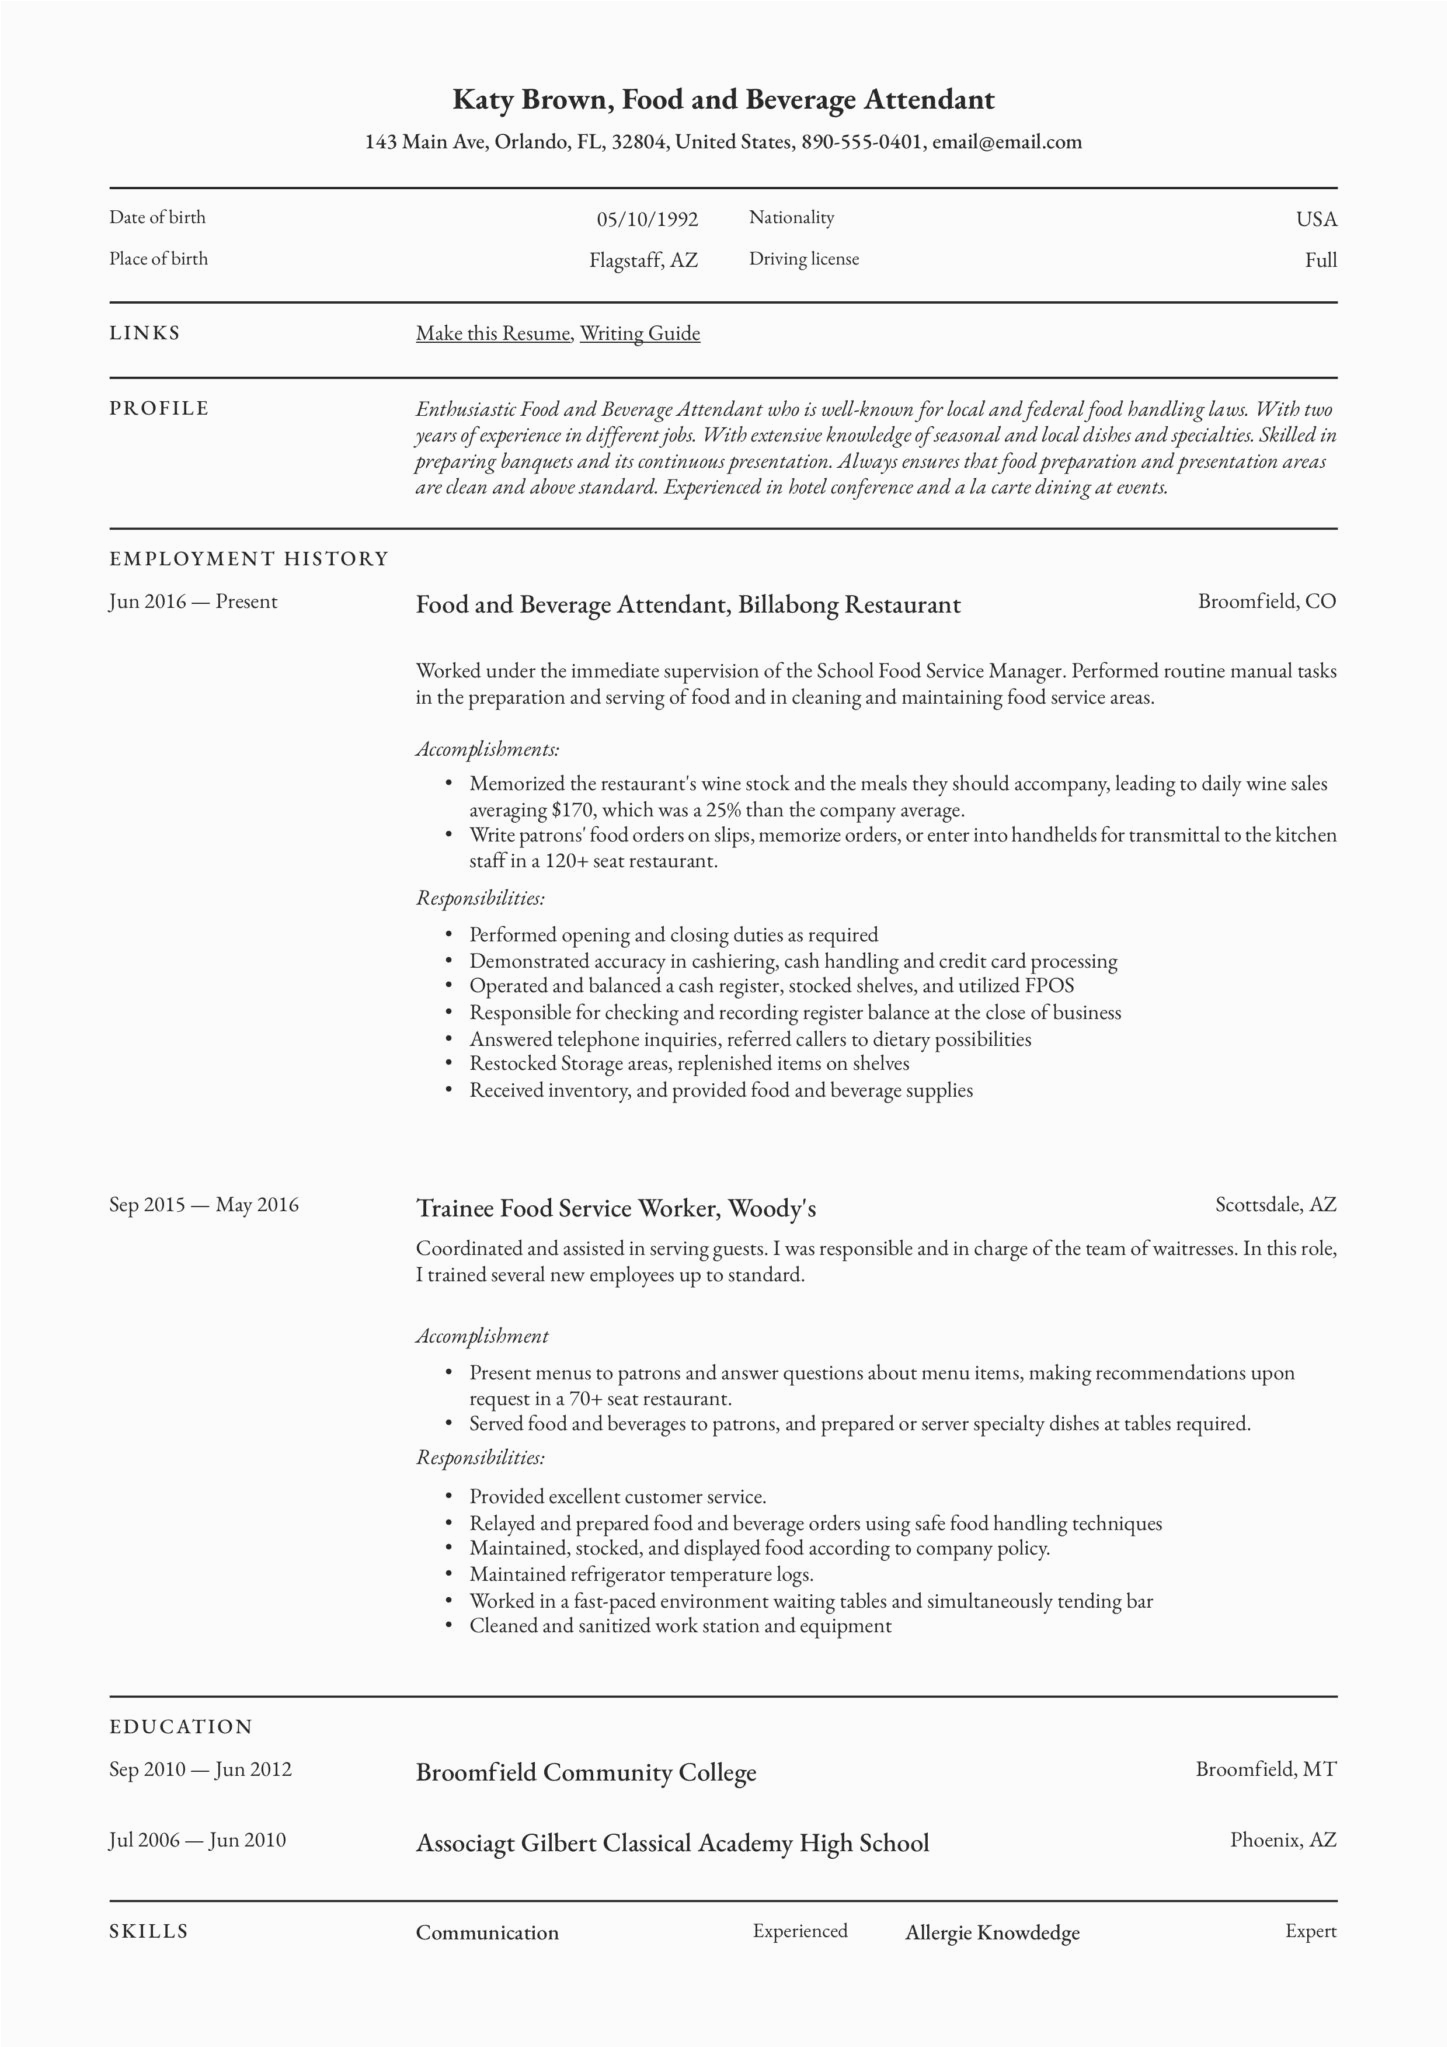 Free Sample Of A Resume Food and Beveage 22 Food & Beverage attendant Resume Samples Pdf S